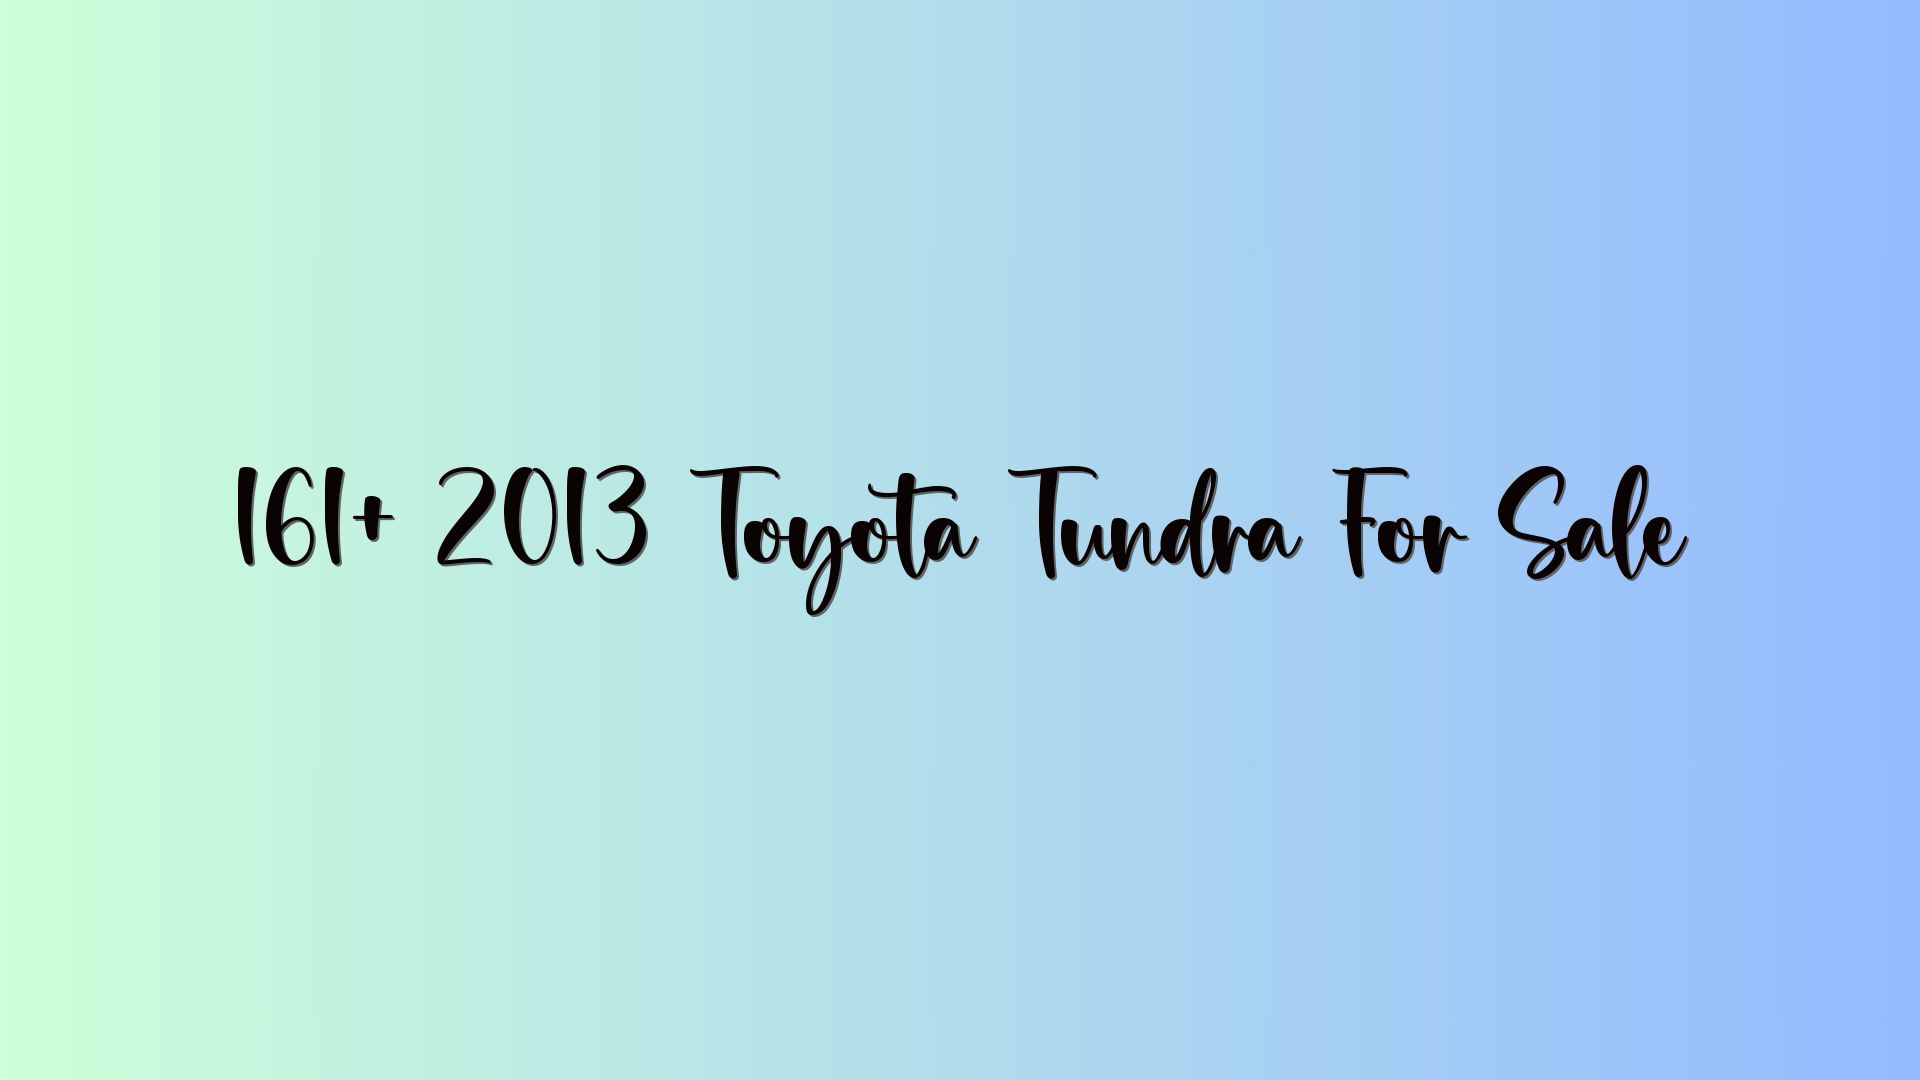 161+ 2013 Toyota Tundra For Sale